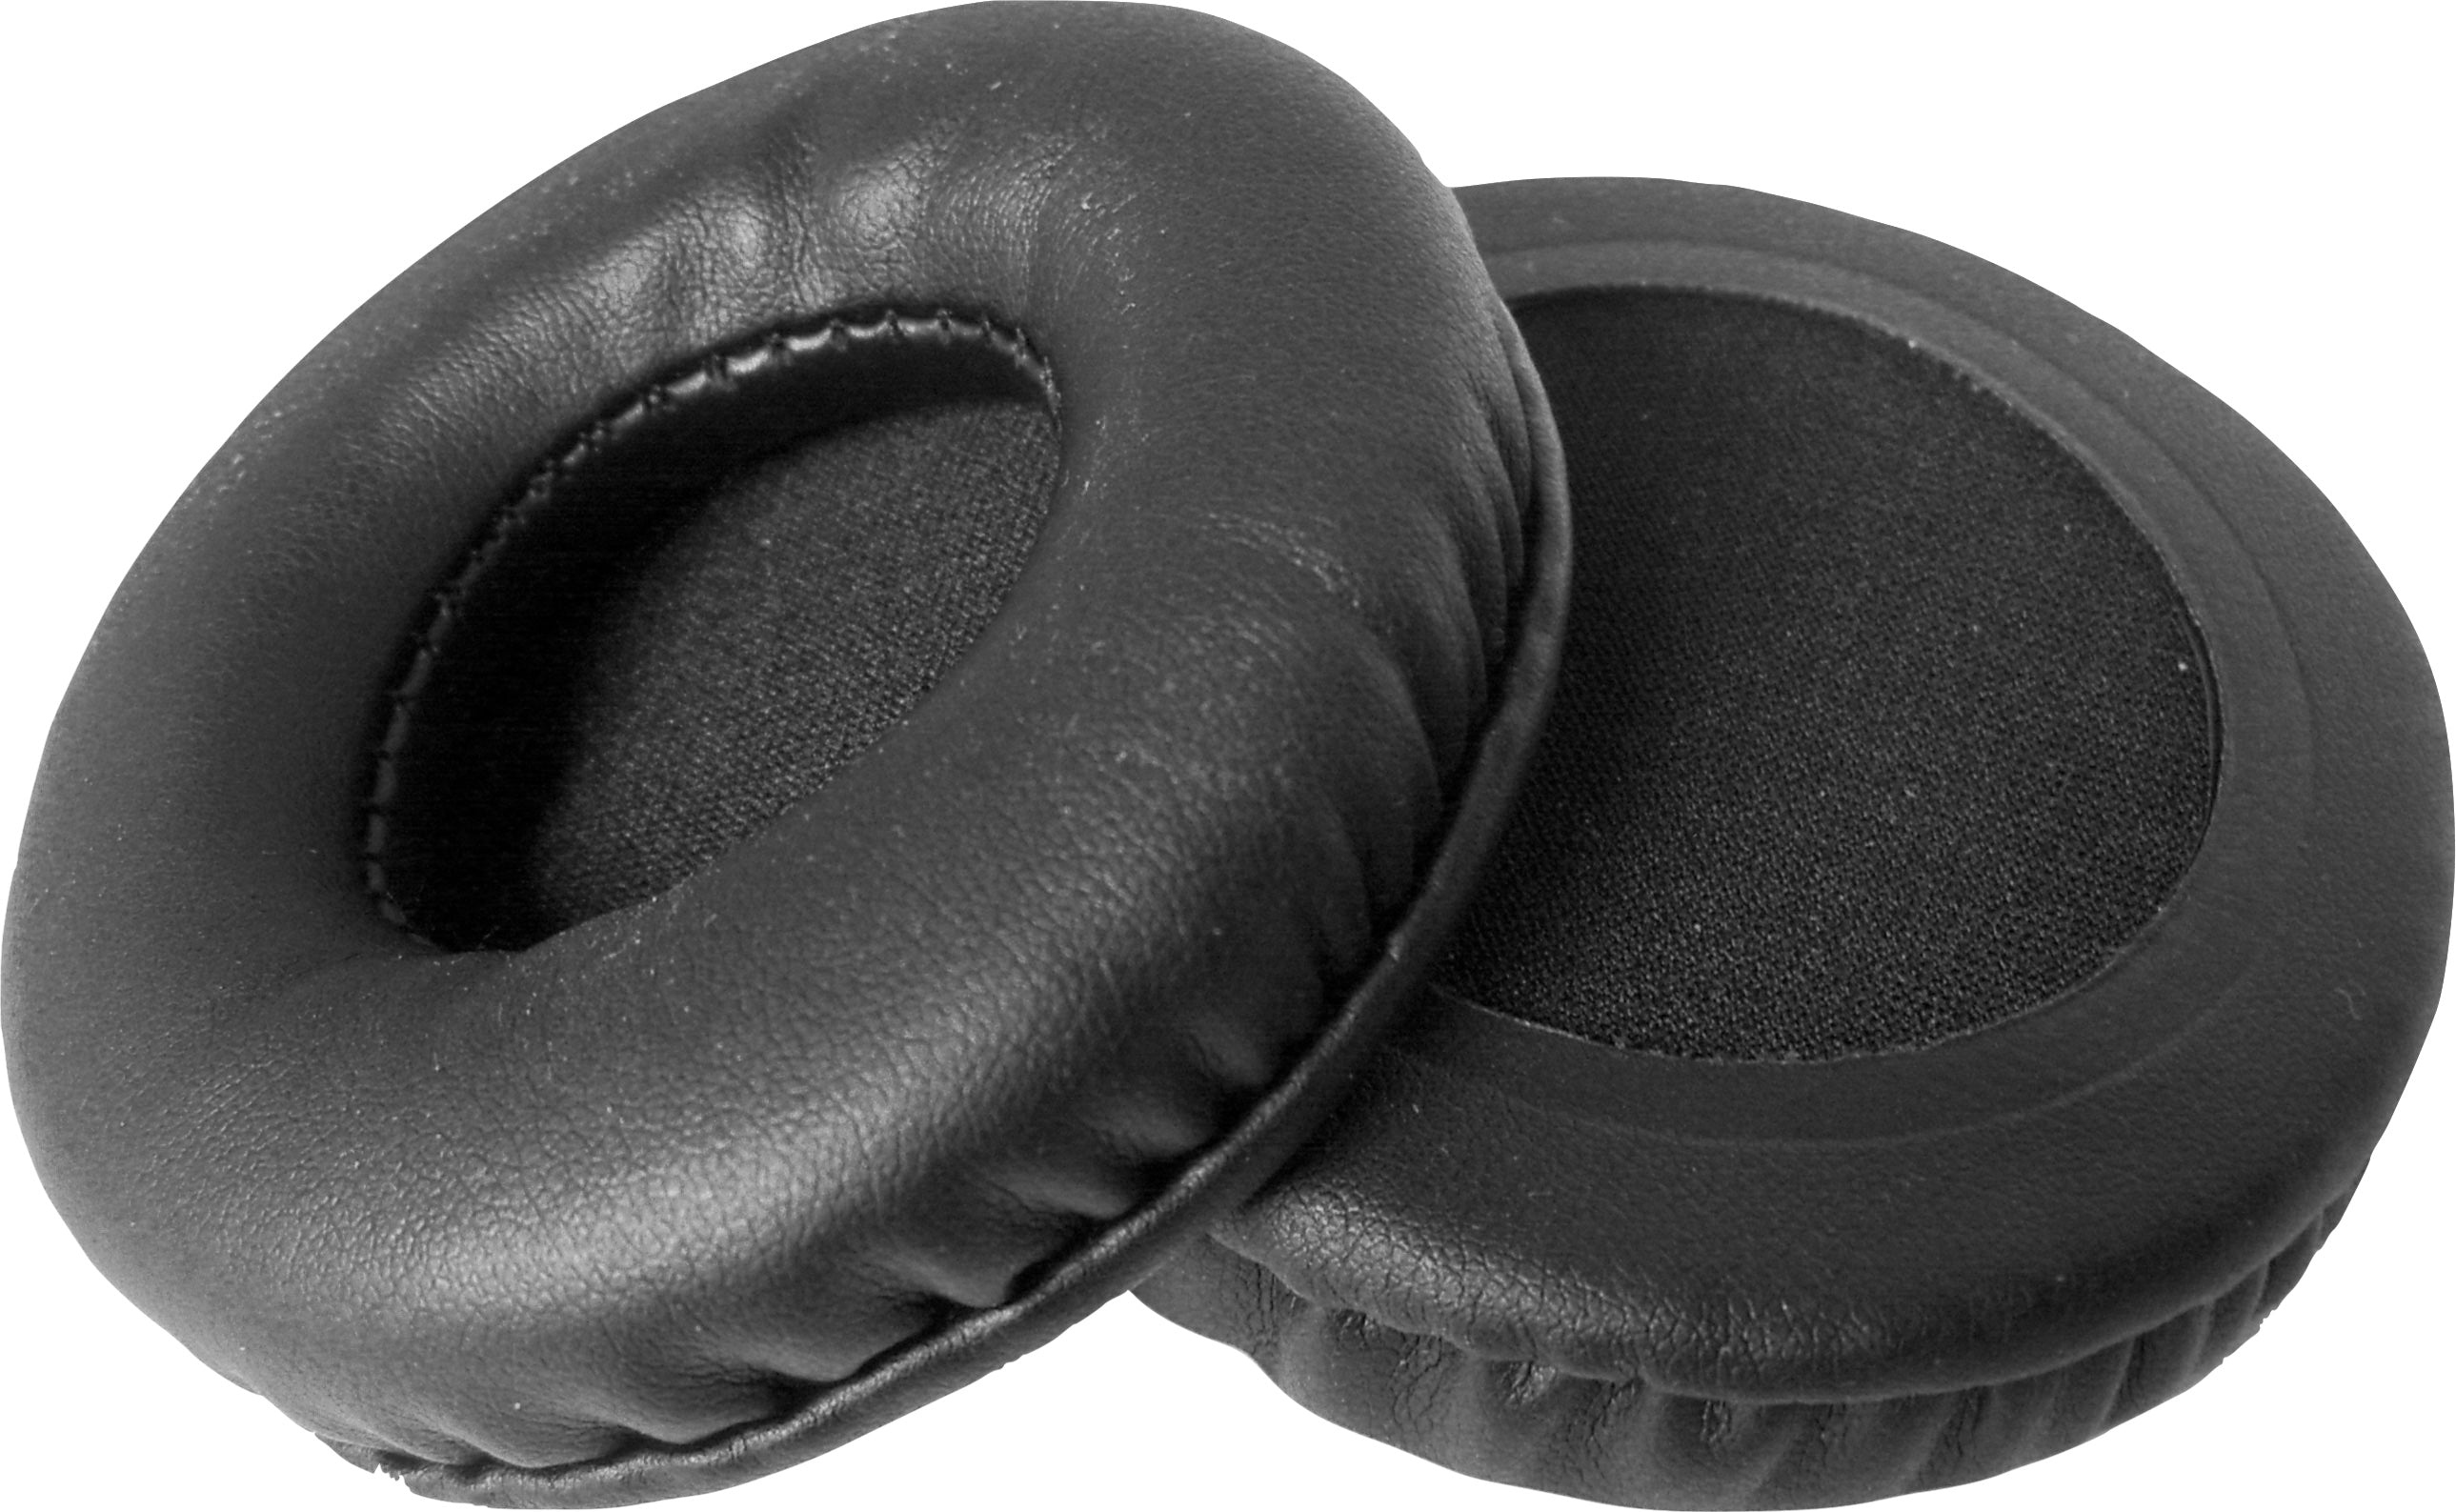 Replacement Ear Pad Cushions for JBL E50BT E50 S500 S700 Synchros AKG K545 K845BT K540 Headphones - CentralSound